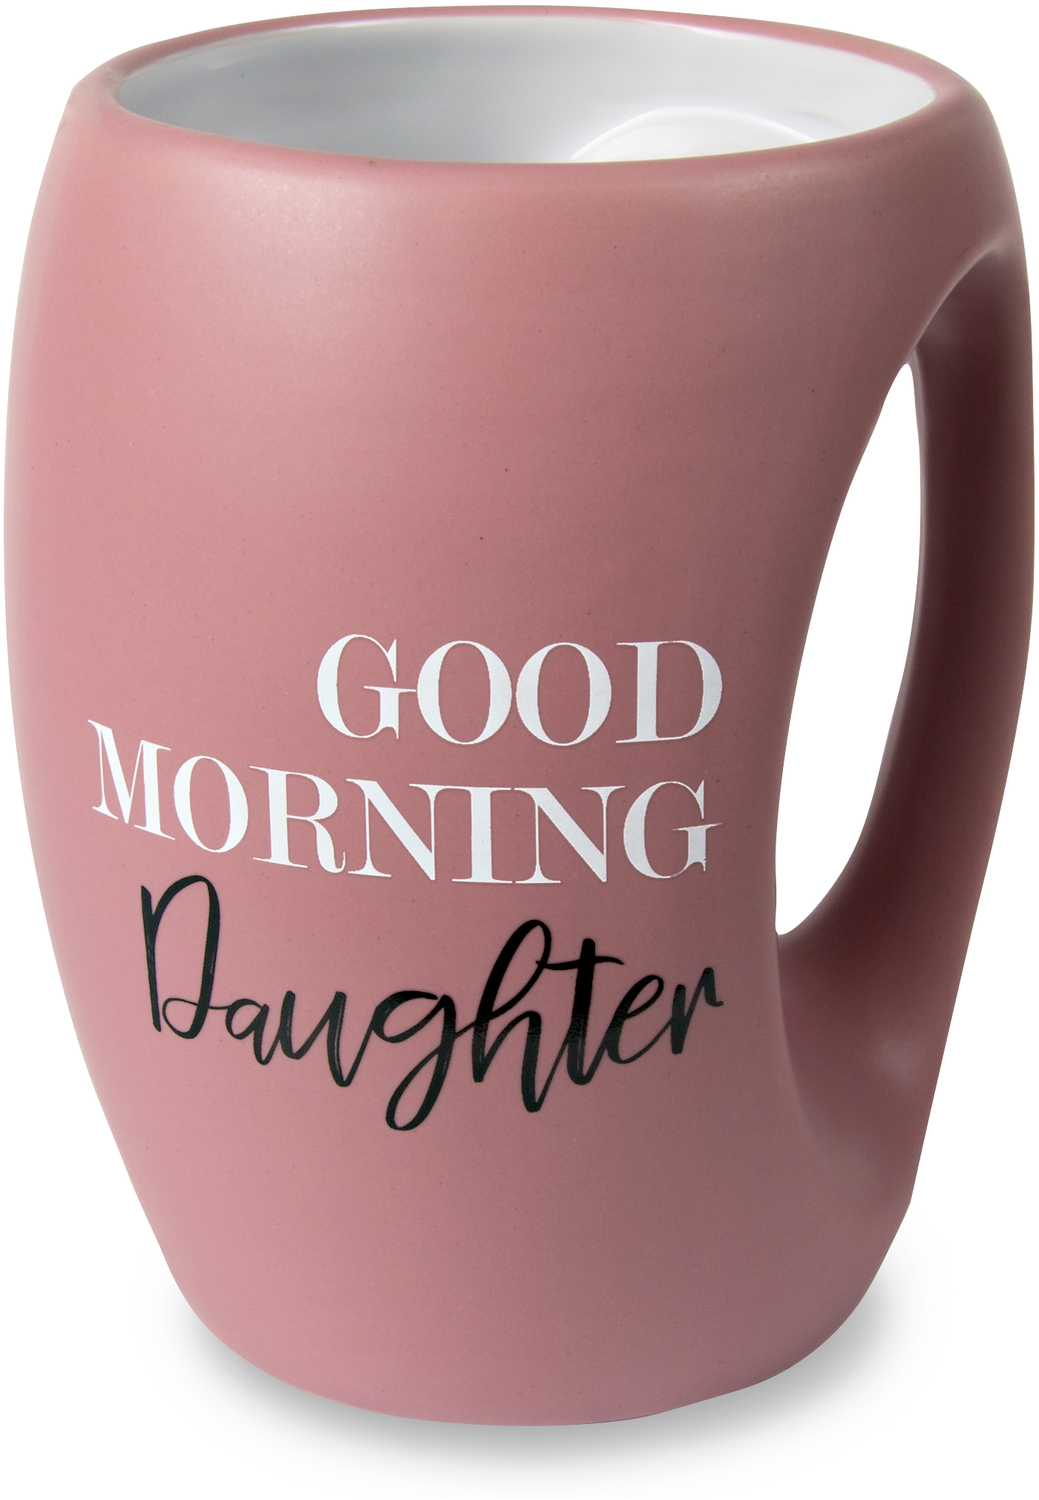 Daughter by Good Morning - Daughter - 16 oz Cup